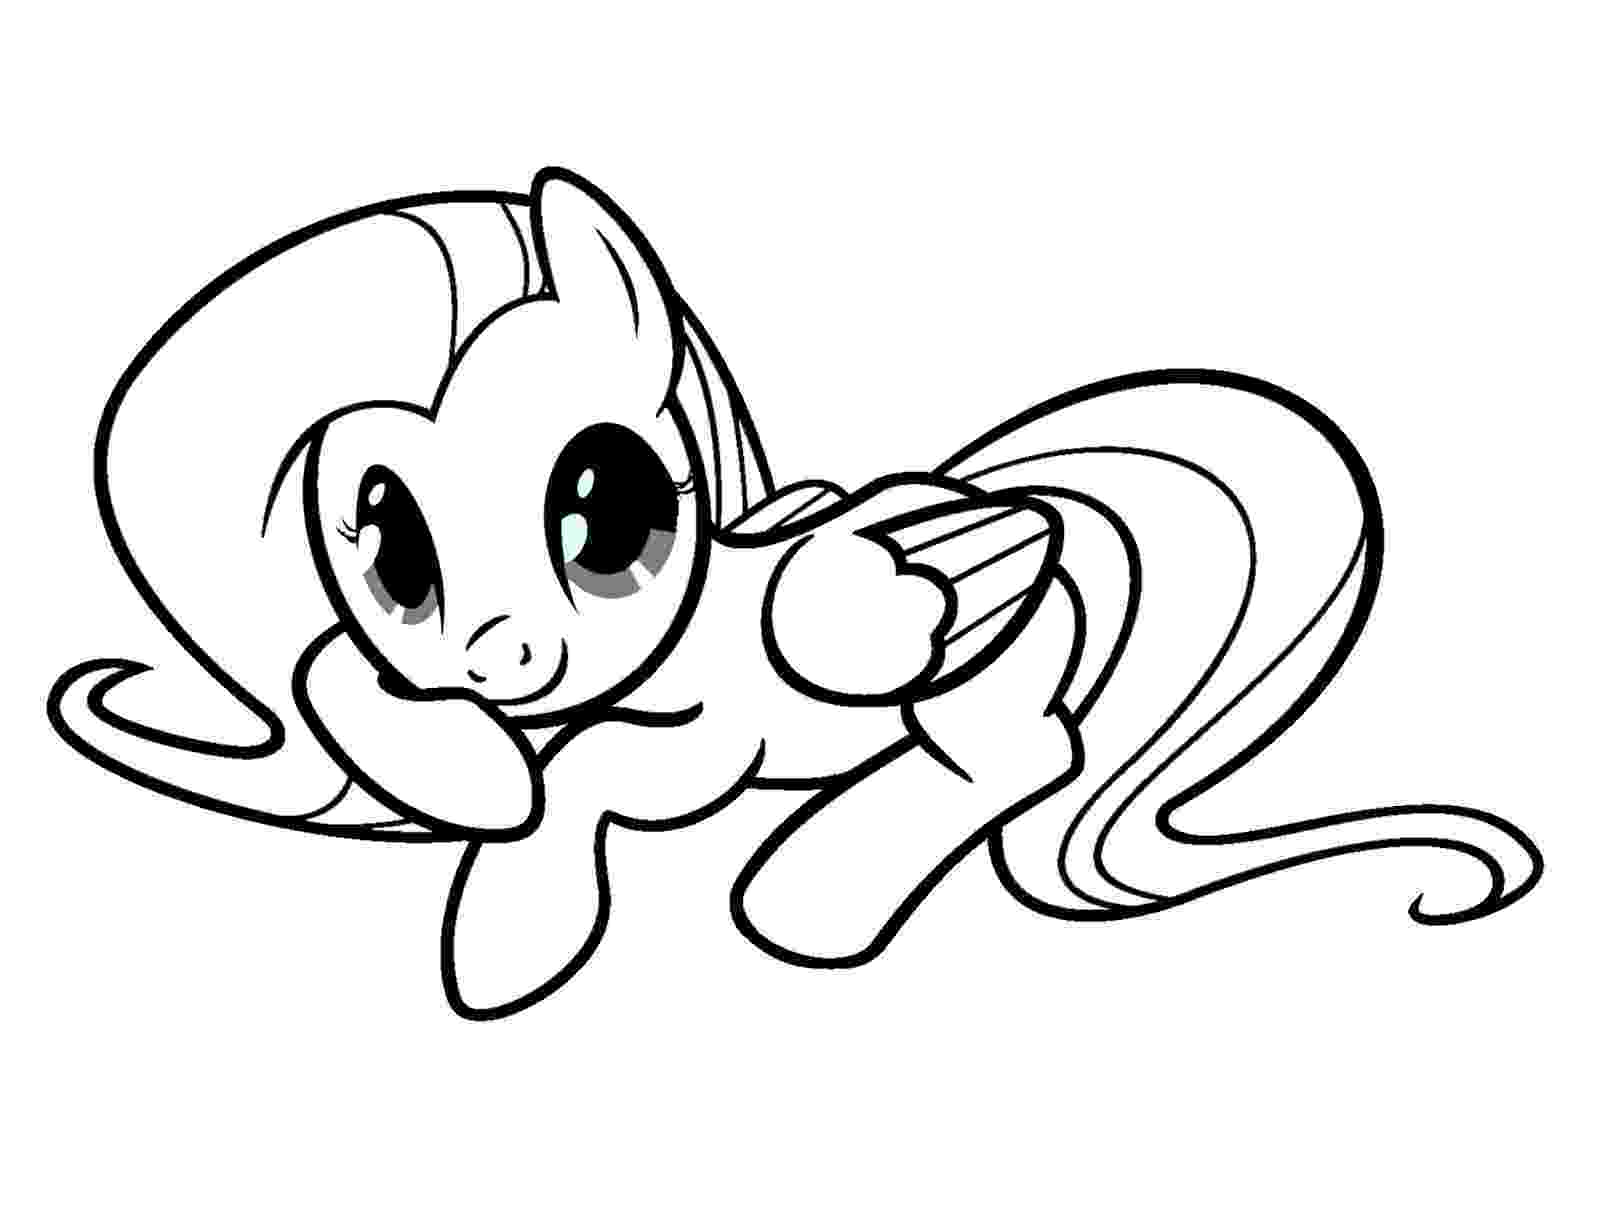 fluttershy coloring fluttershy coloring pages best coloring pages for kids fluttershy coloring 